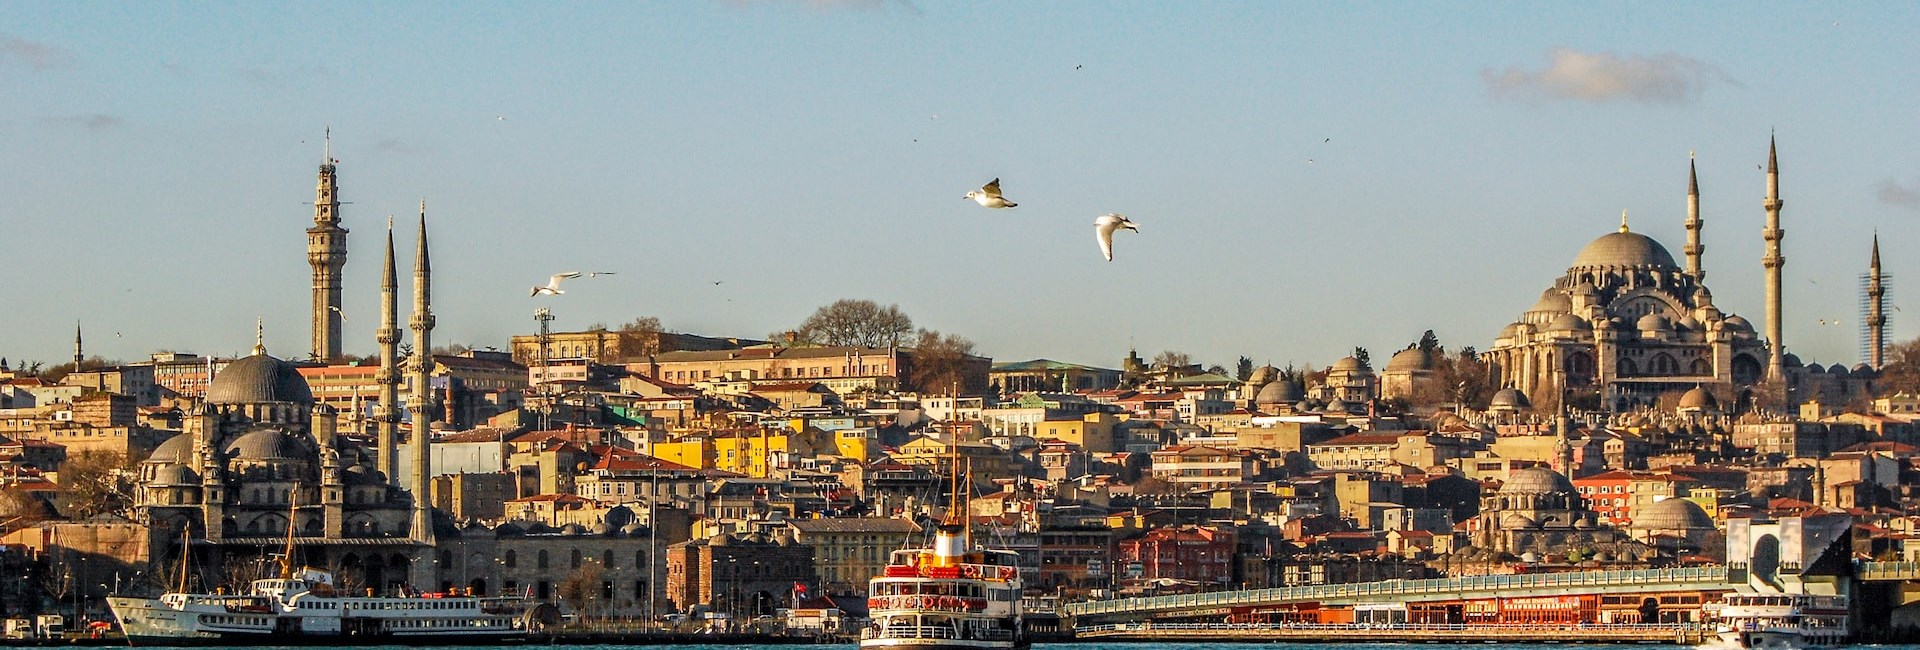 A landscape photo of Istanbul by the sea